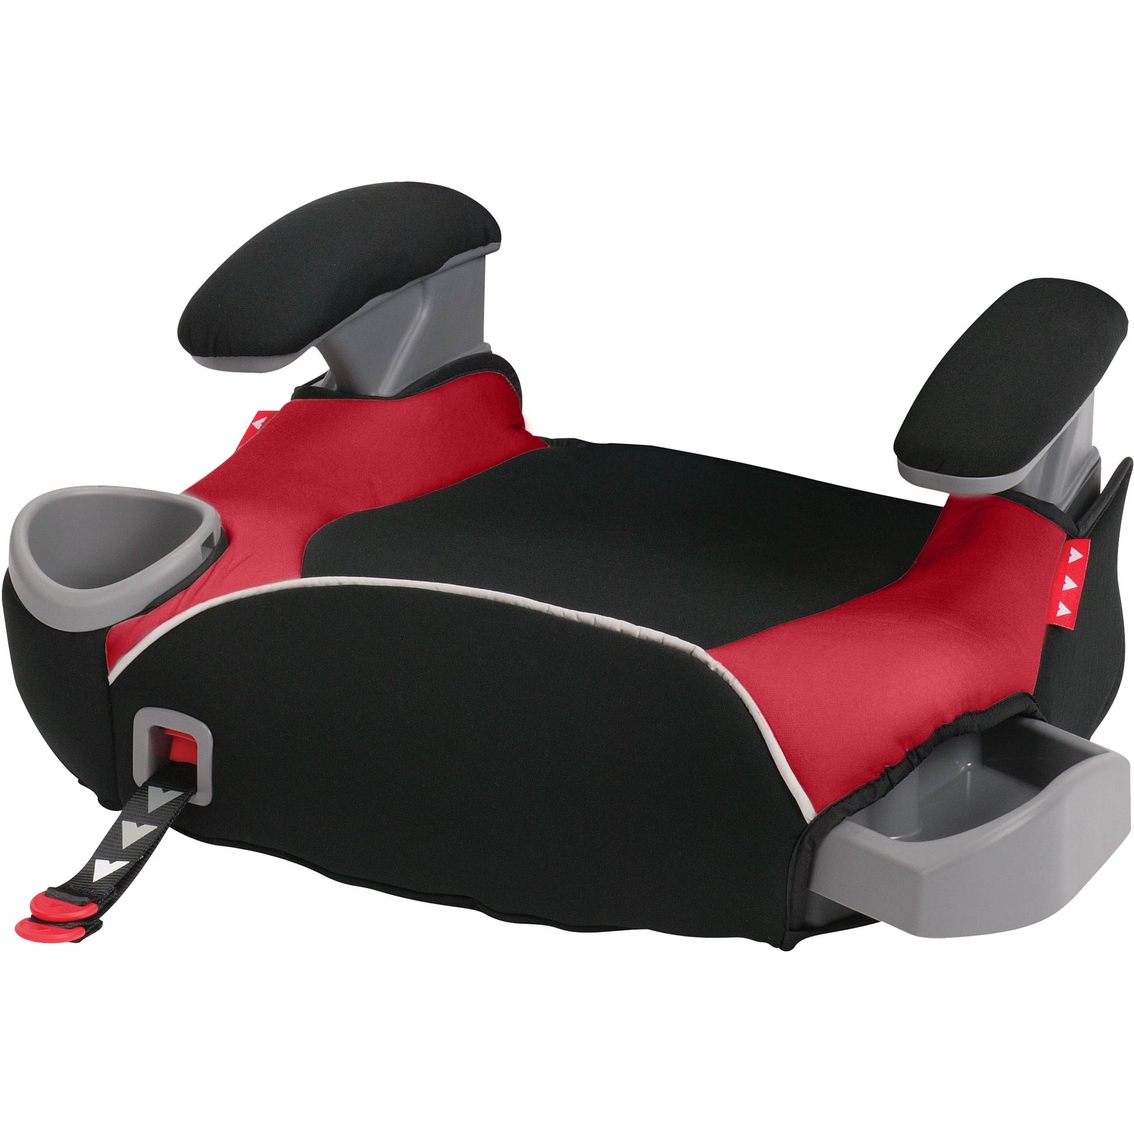 Graco Affix Youth Highback Booster Car Seat with Latch System - Image 2 of 3